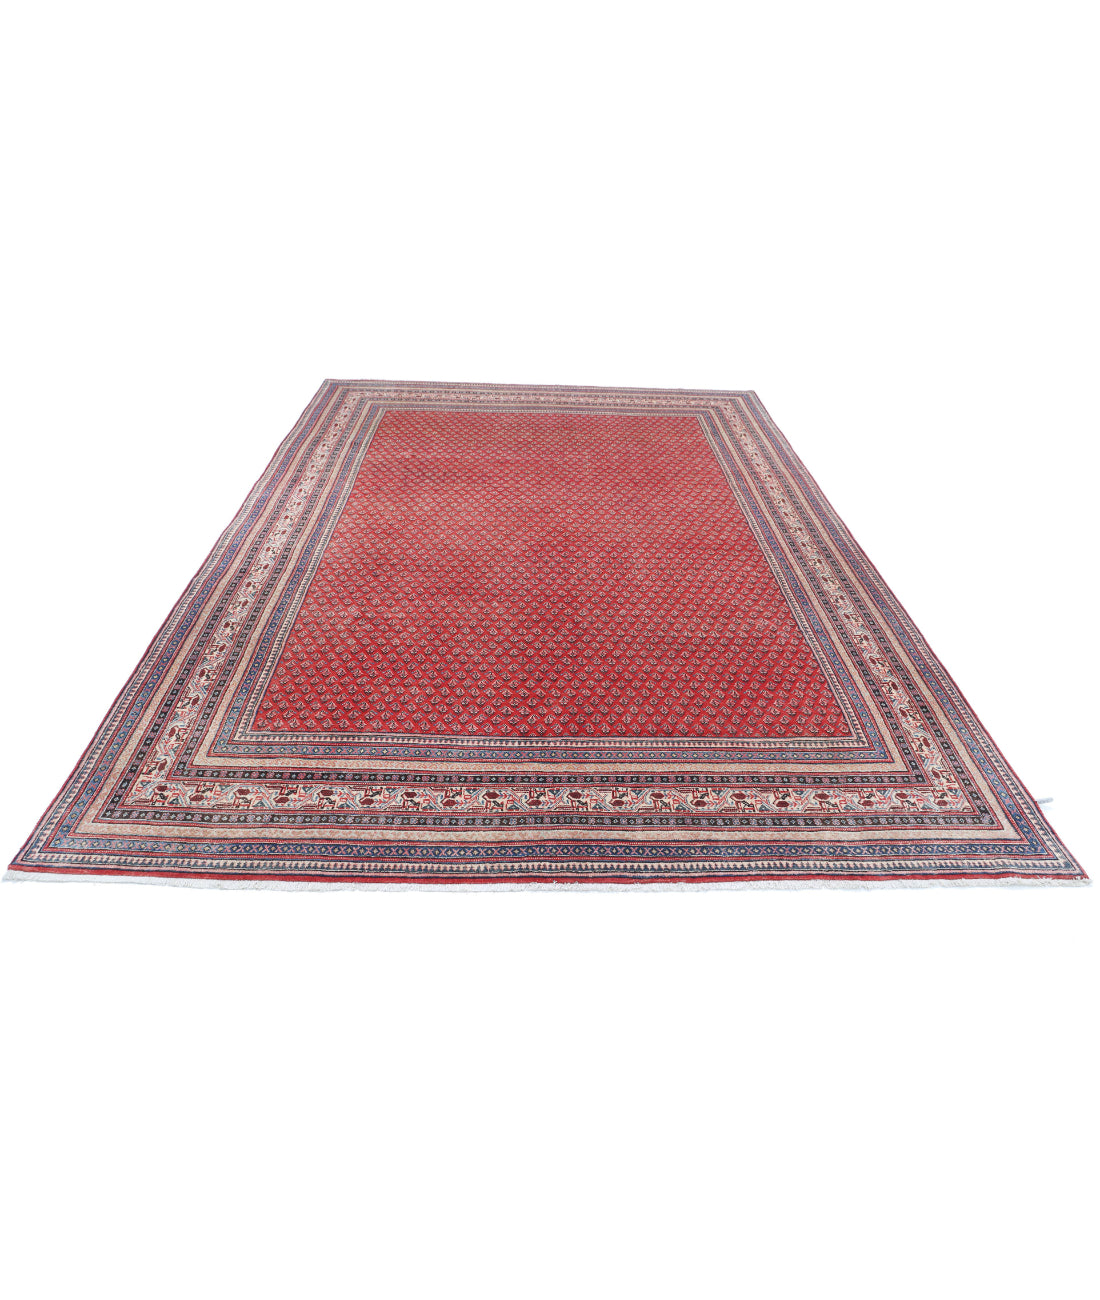 Hand Knotted Persian Mir Saraband Wool Rug - 7'8'' x 11'2'' 7'8'' x 11'2'' (230 X 335) / Red / Blue